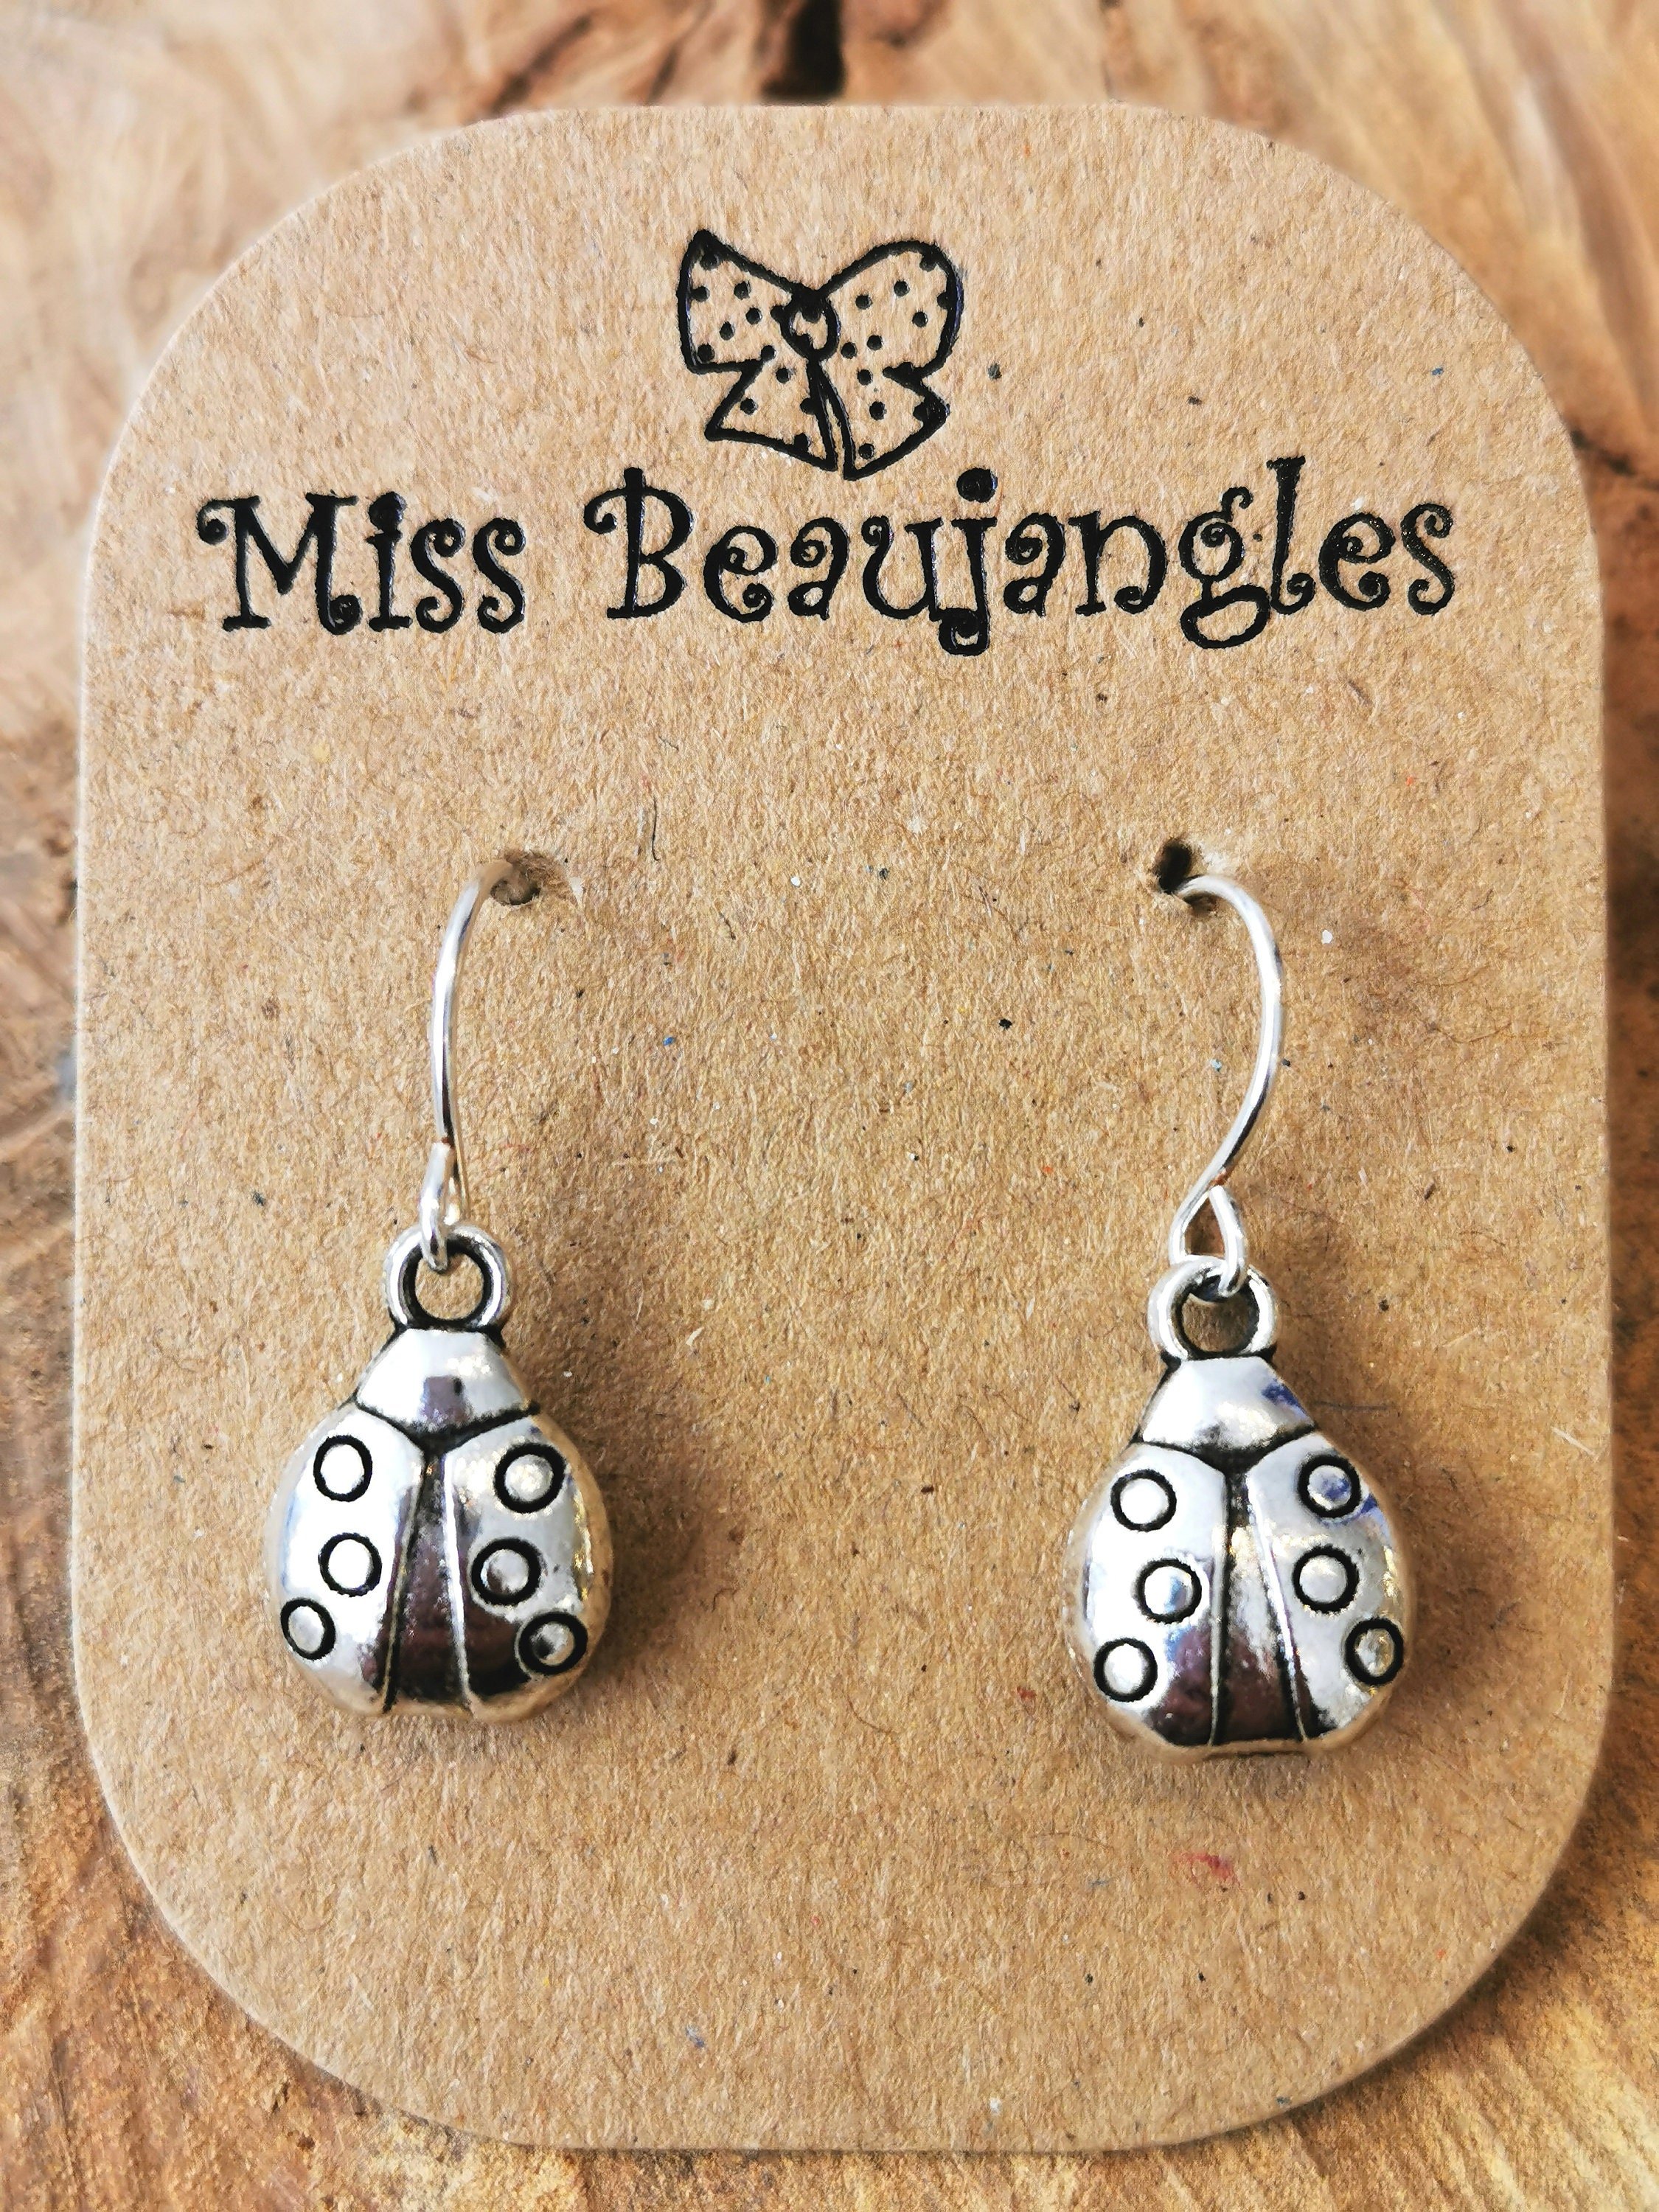 Dangly silver sausage dog earrings Silver plated hypoallergenic nickel  free  Miss Beaujangles